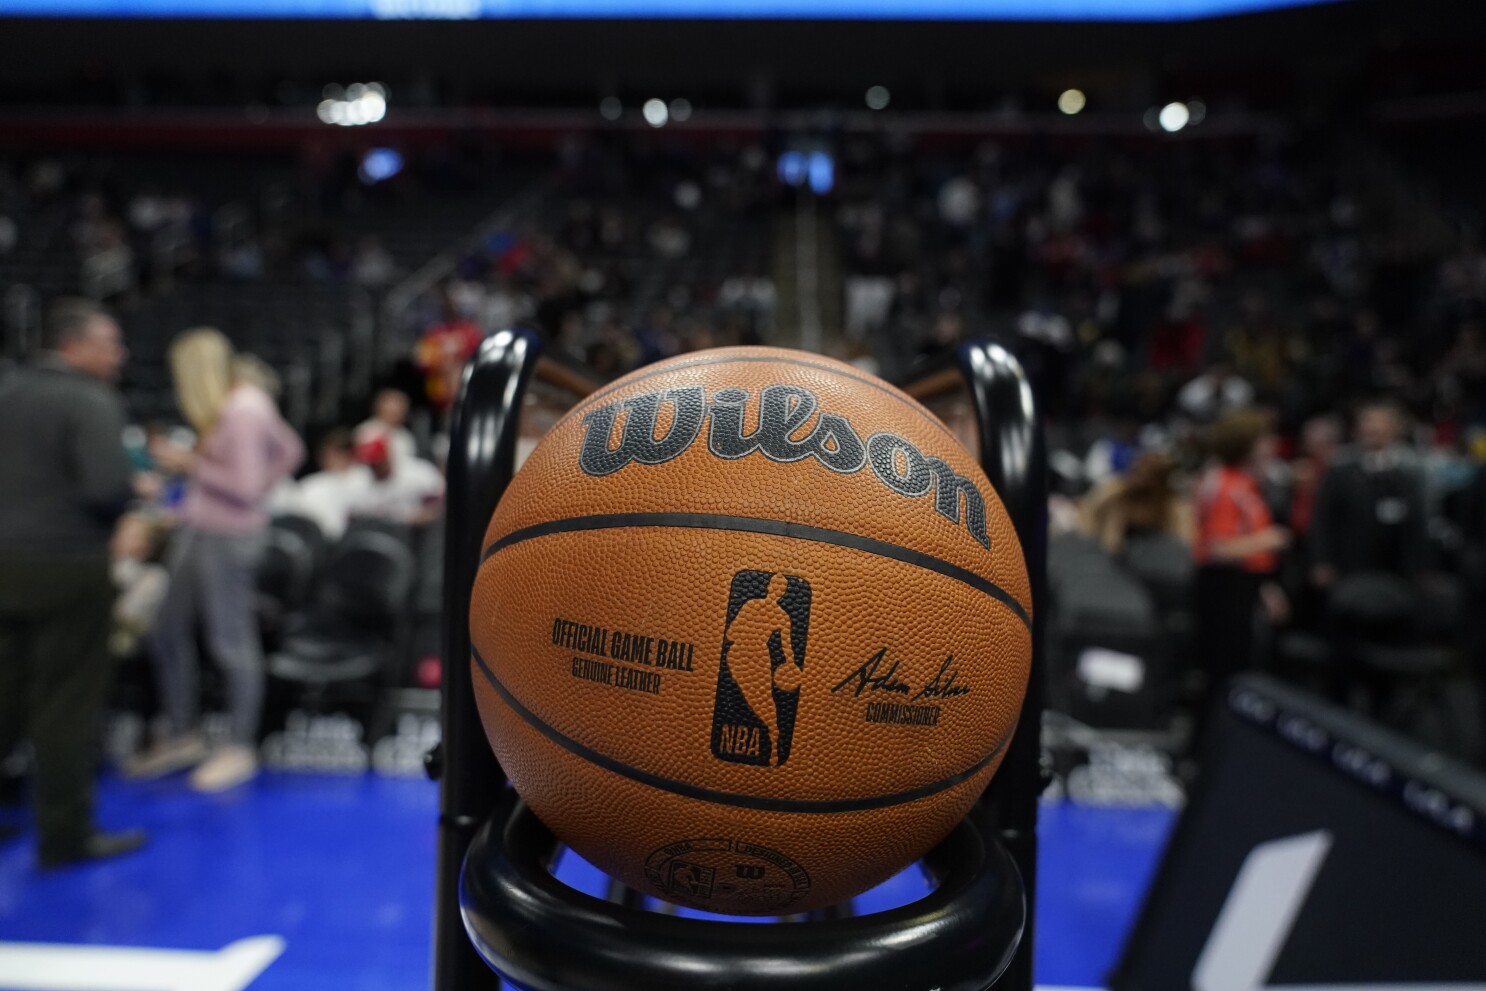 It's Official: Wilson Reveals New NBA Game Ball